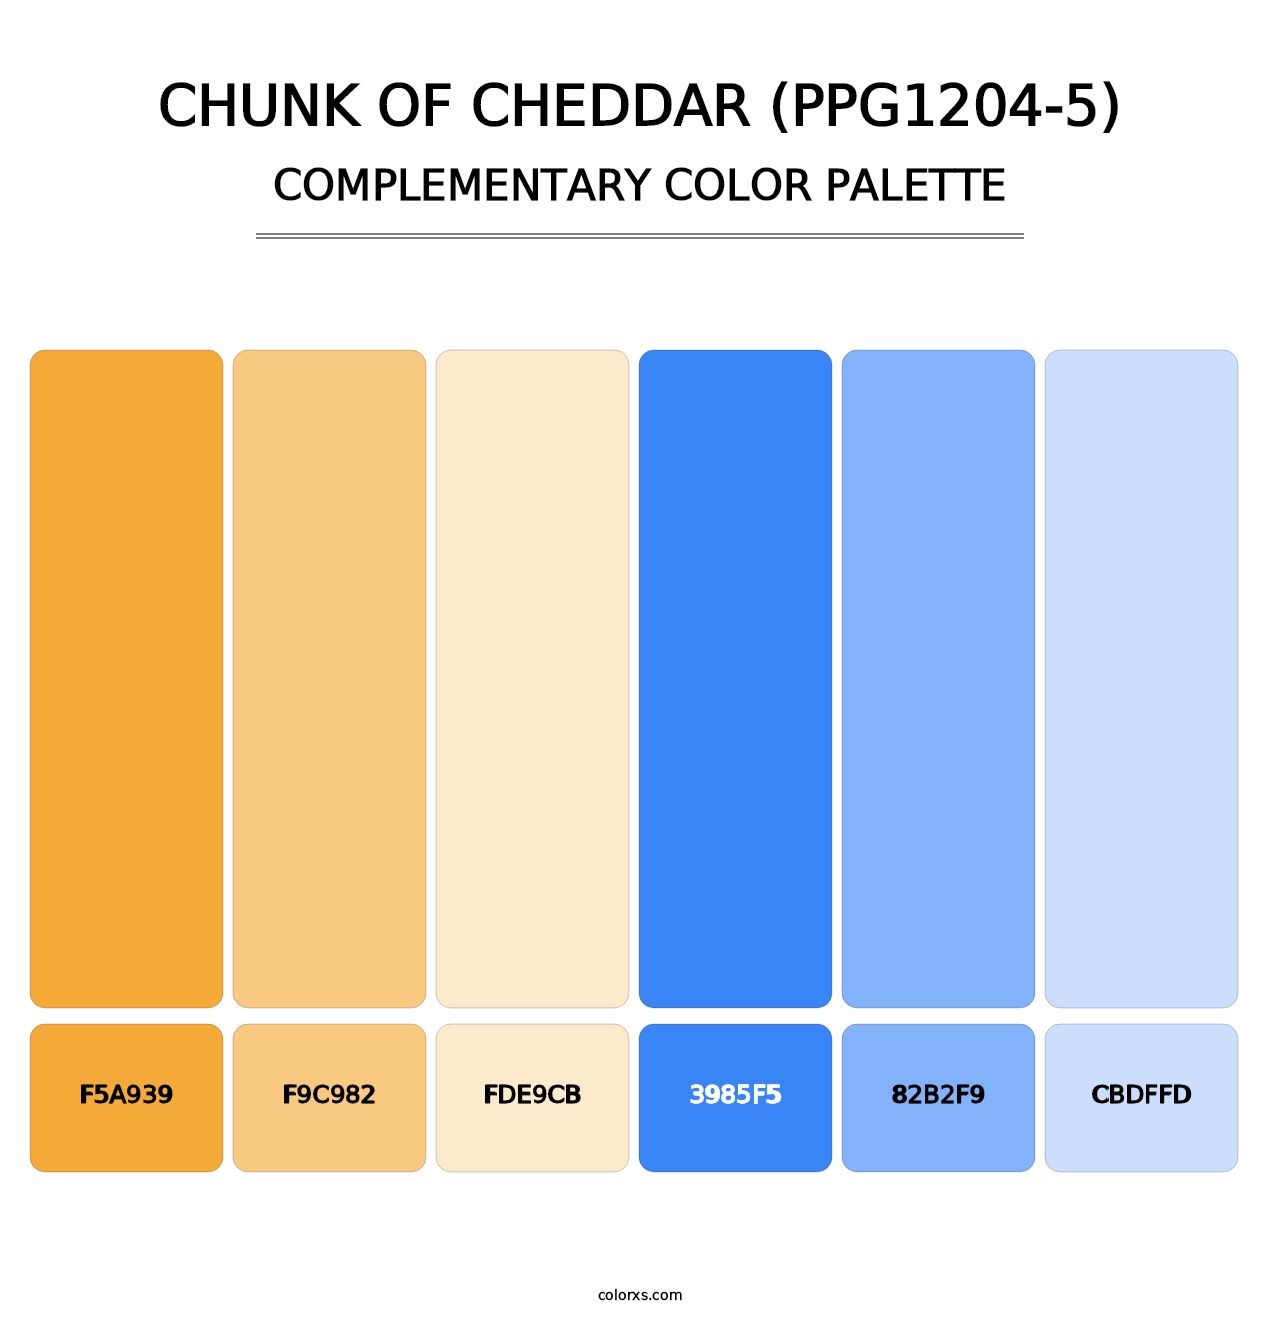 Chunk Of Cheddar (PPG1204-5) - Complementary Color Palette